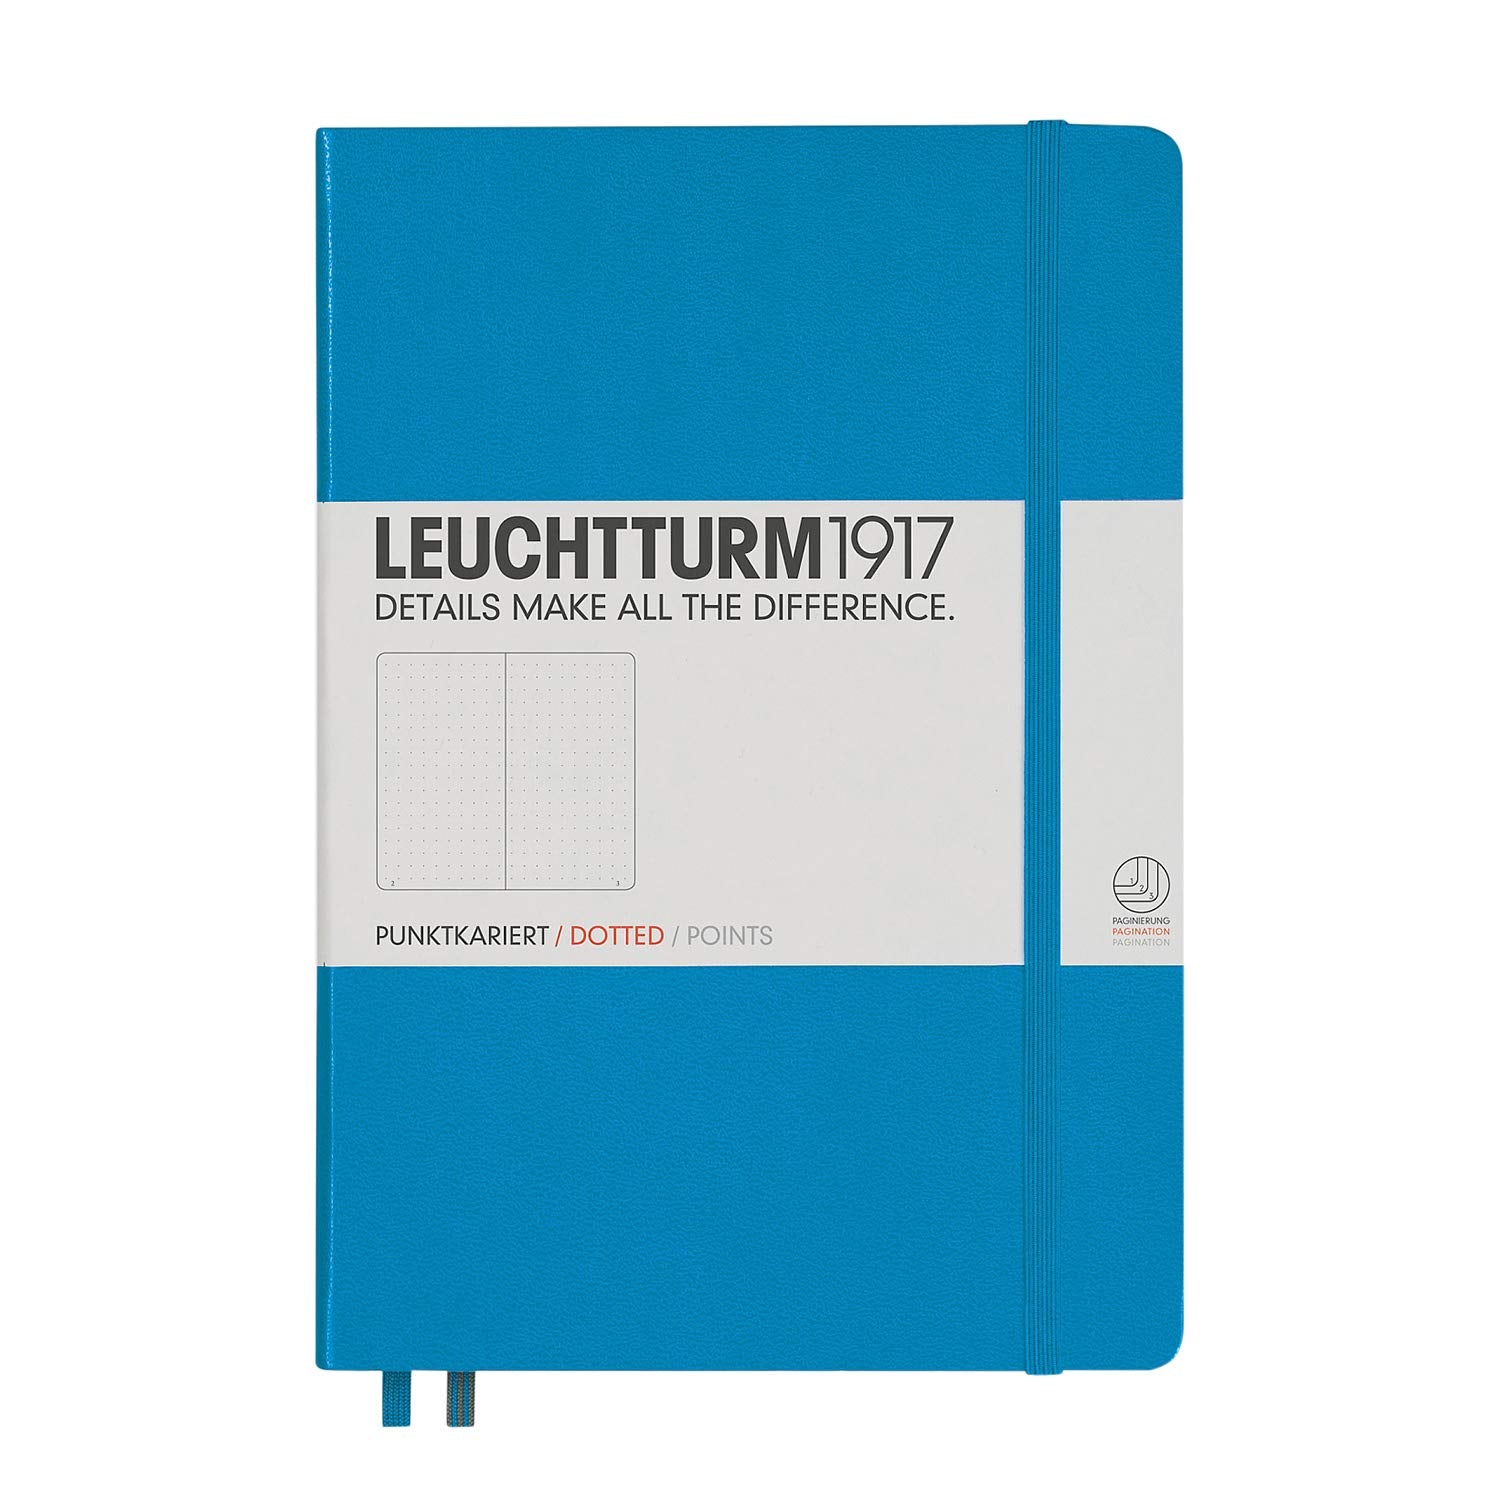 Leuchtturm1917 Medium A5 Dotted Hardcover Notebook (Azure) - 249 Numbered Pages